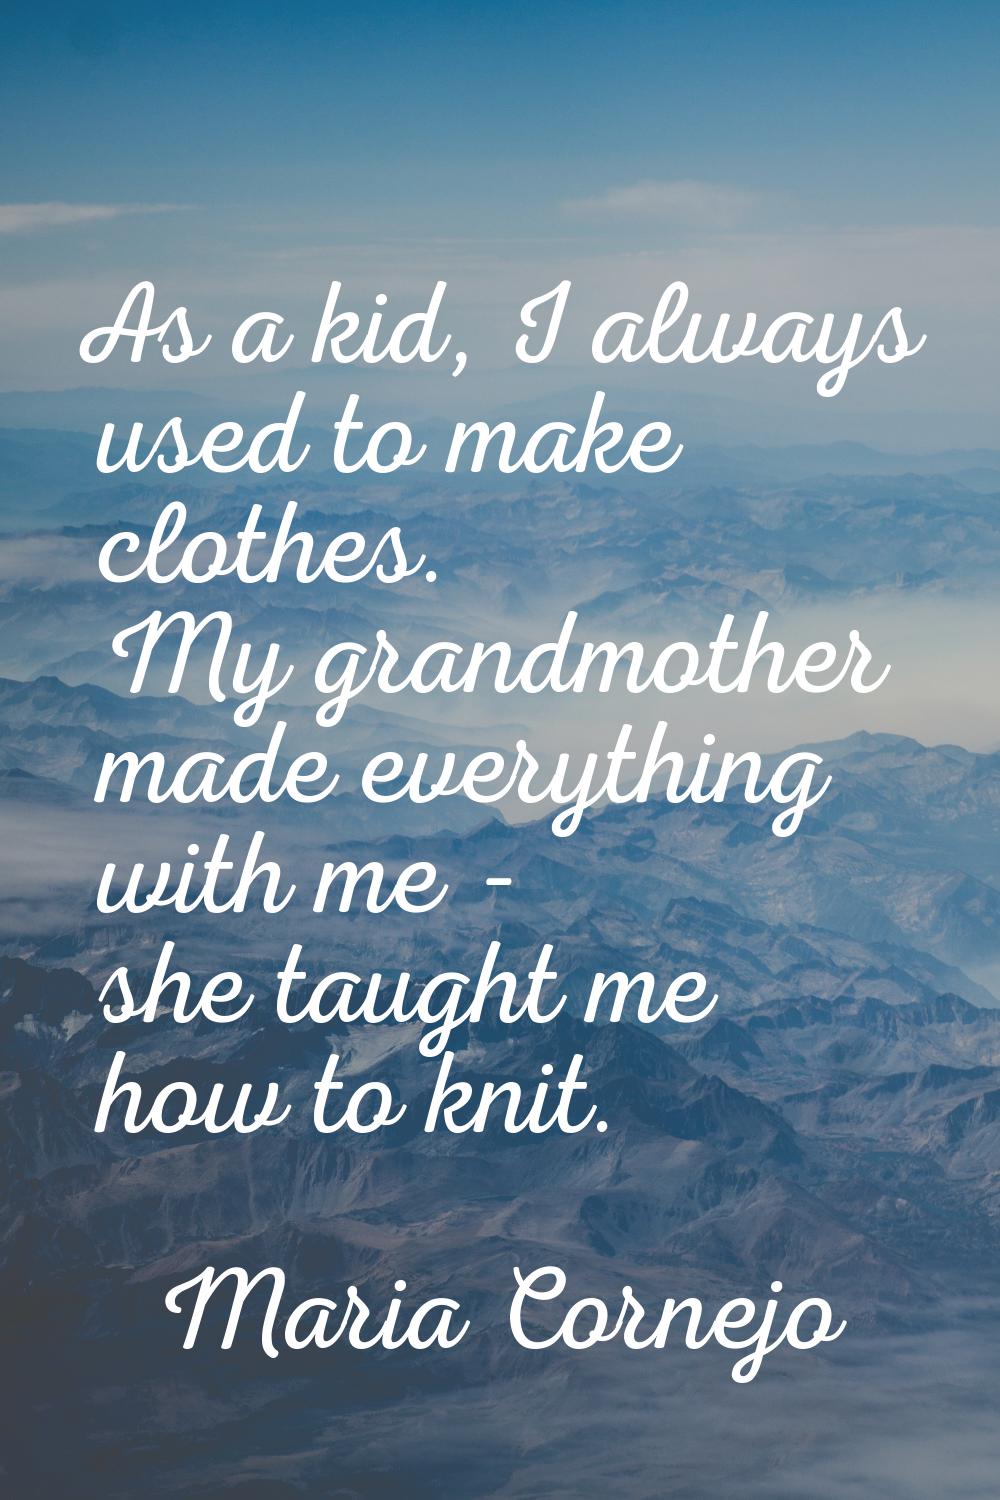 As a kid, I always used to make clothes. My grandmother made everything with me - she taught me how